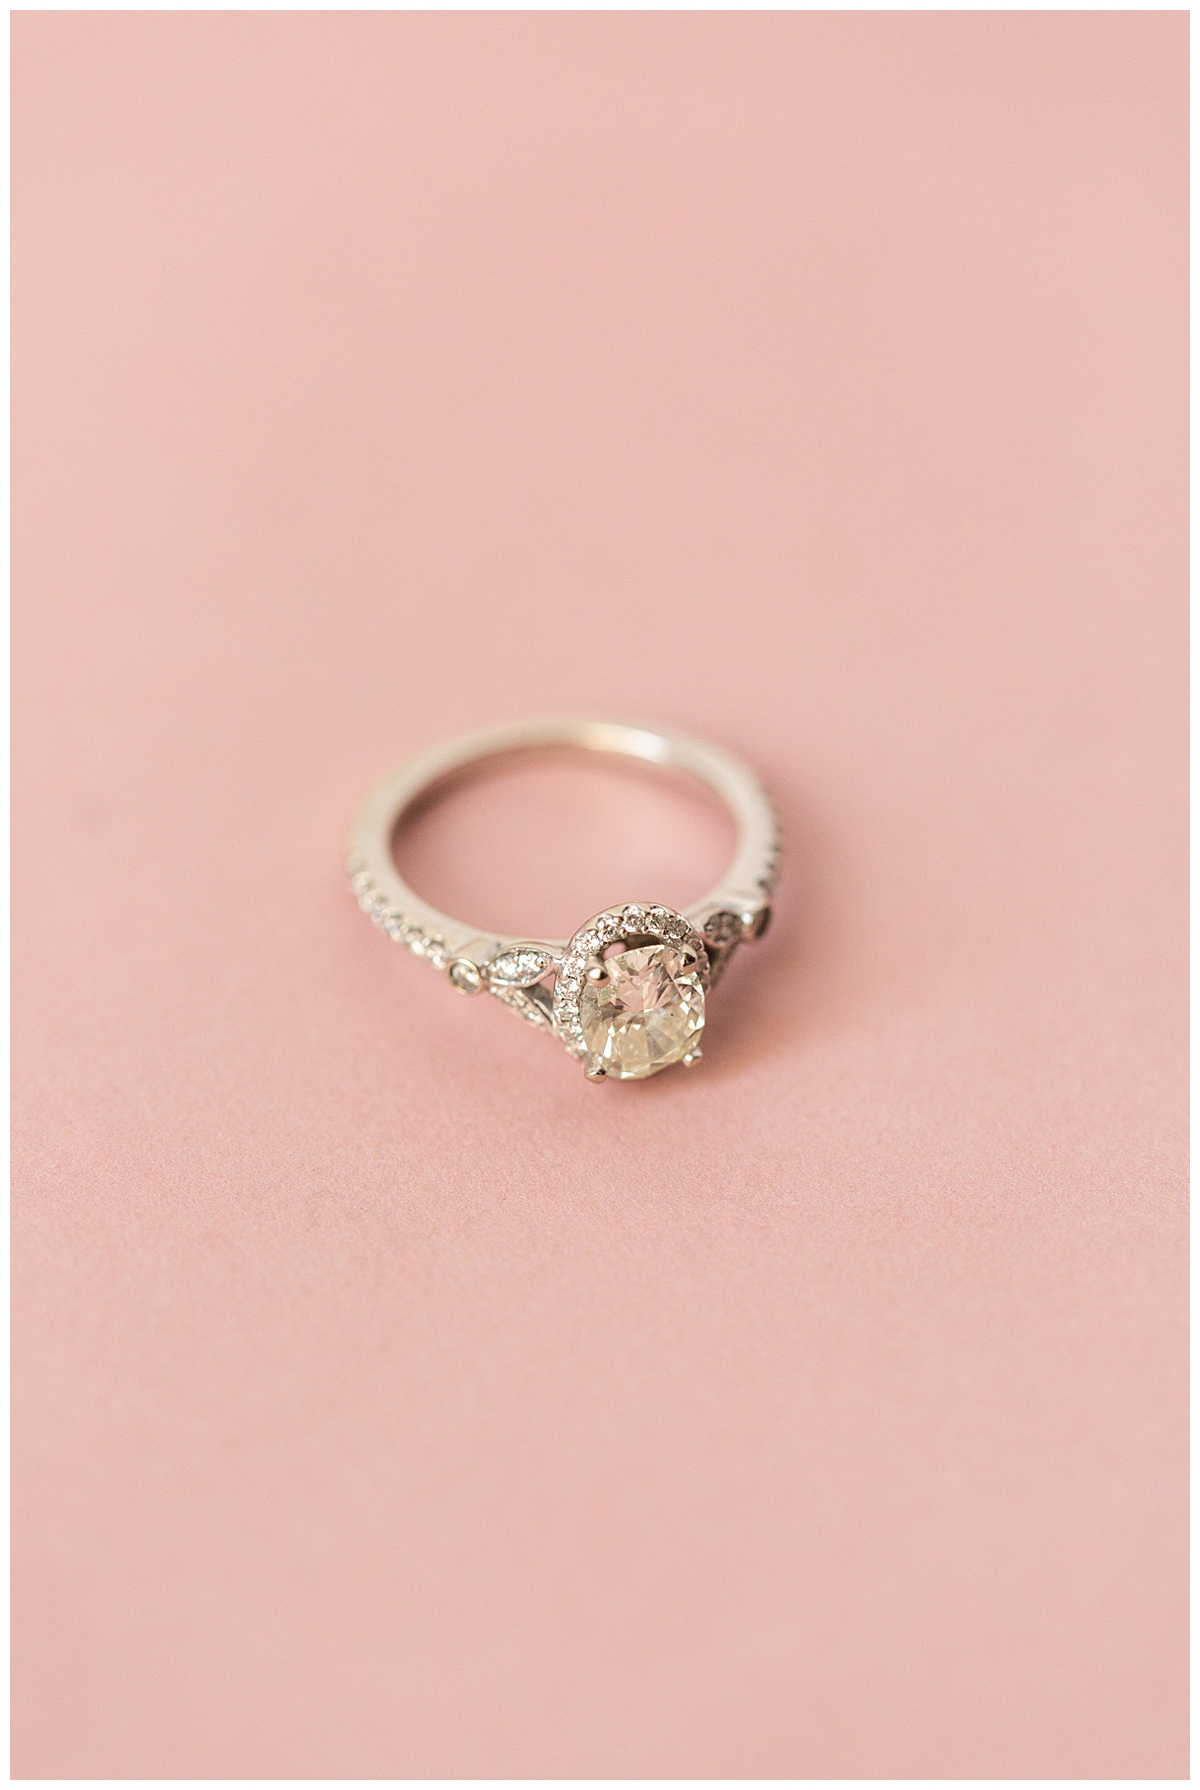 The bride's engagement ring is displayed on a pink background. 